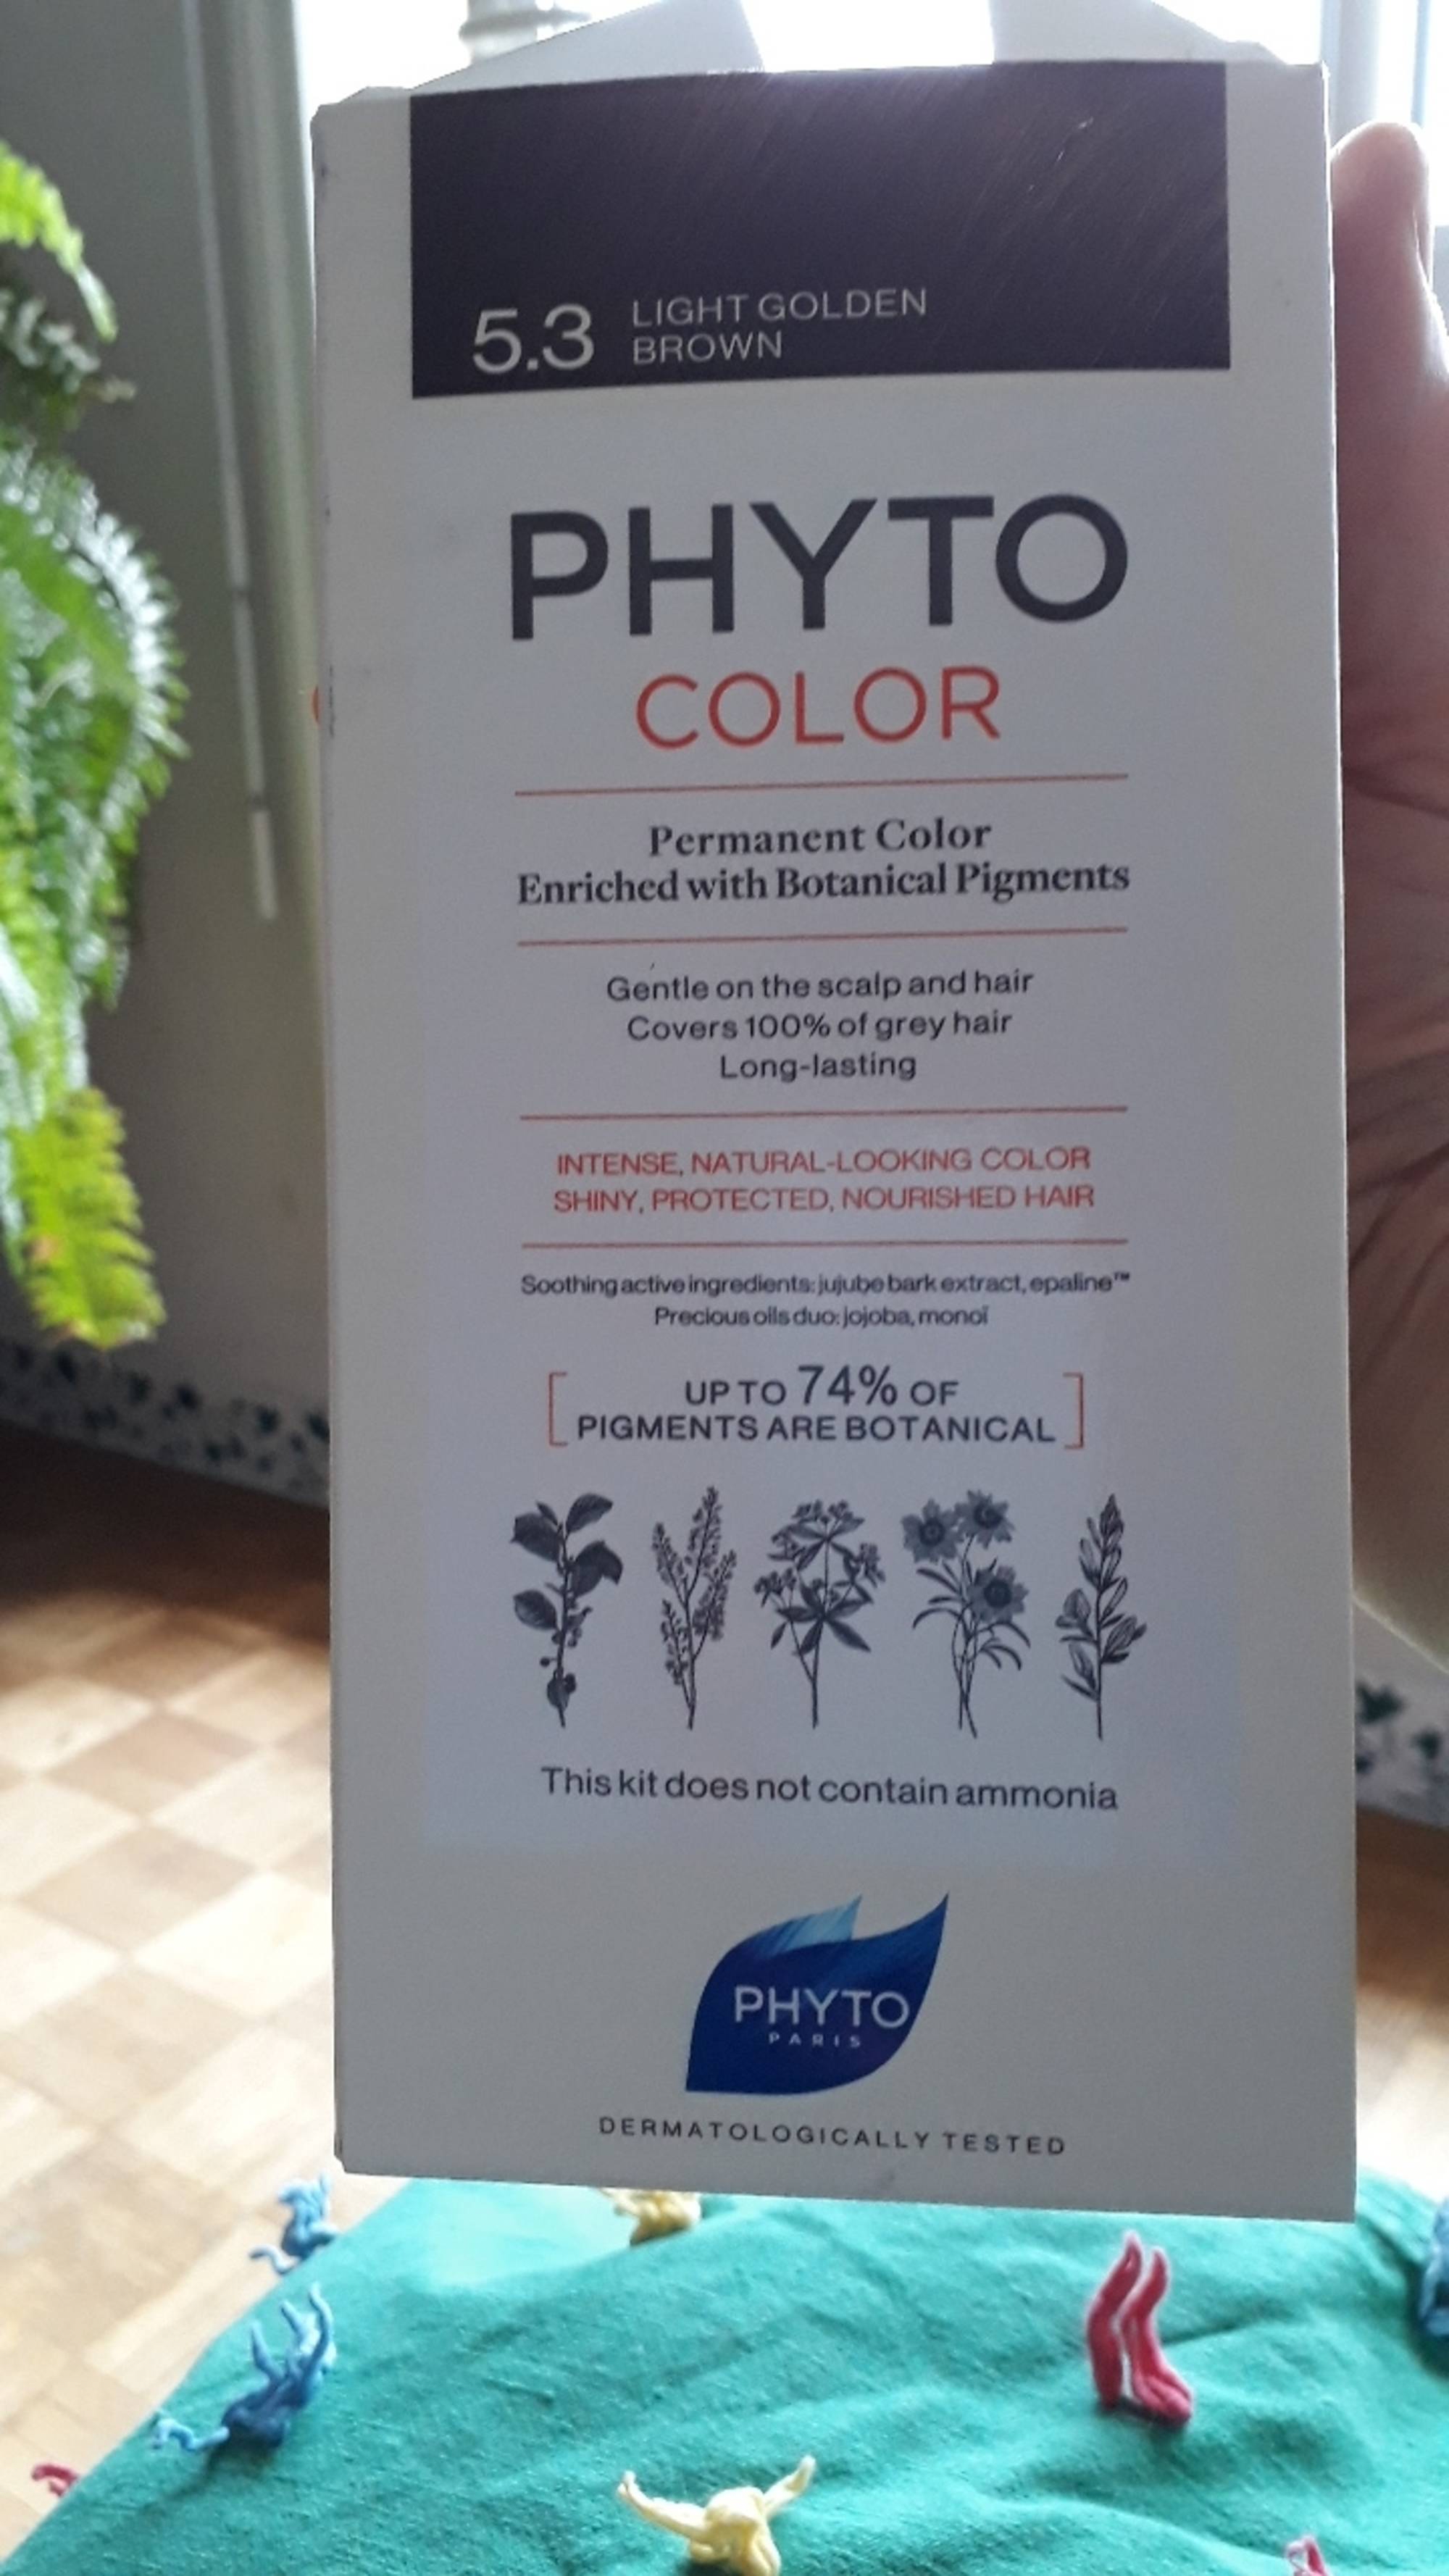 PHYTO - Color - Permanent color 5.3 light golden brown